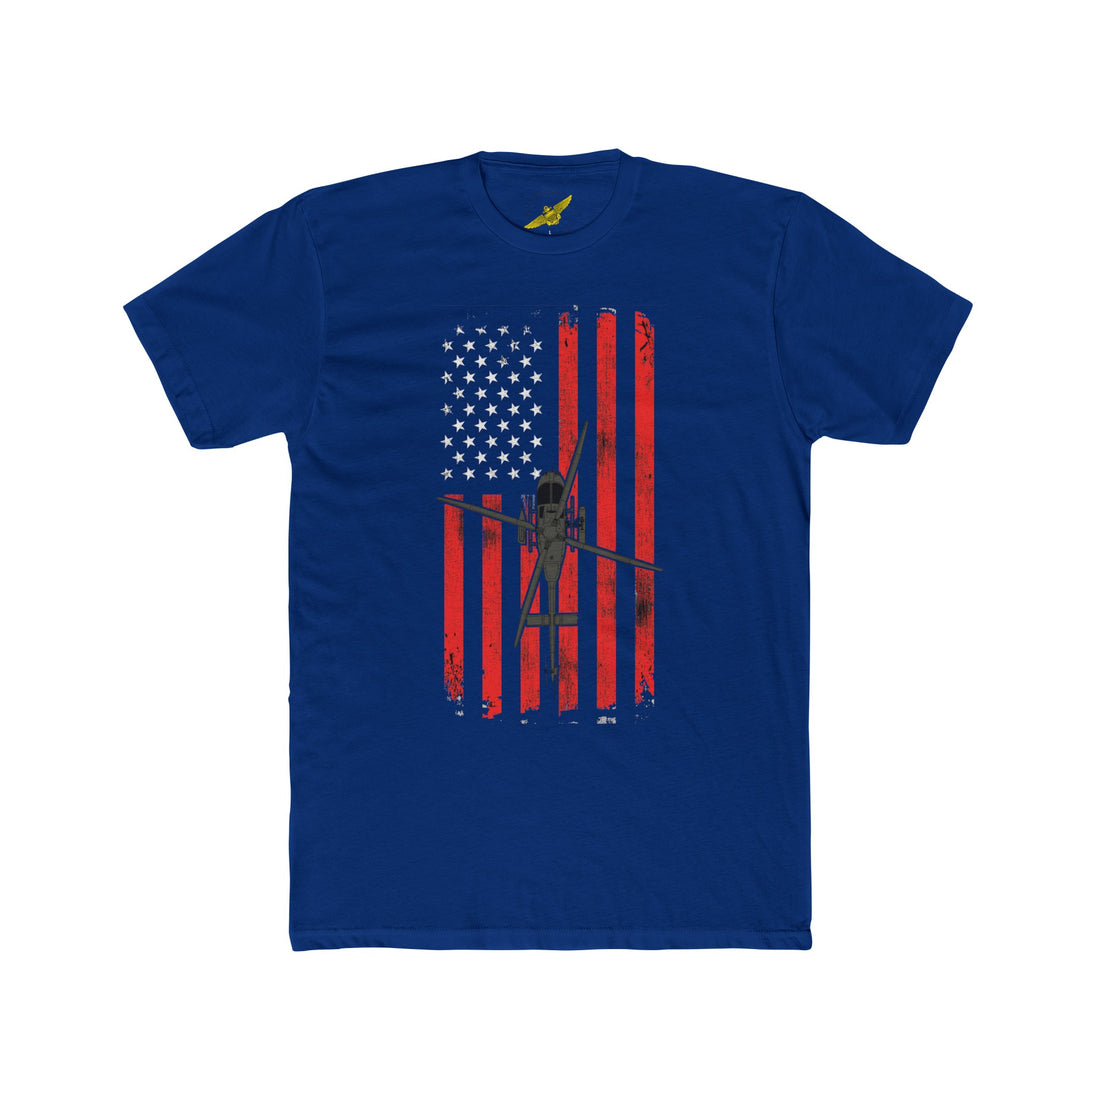 OH-58 Kiowa Warrior Patriotic Flag Tee, US Army Recon Attack Helicopter